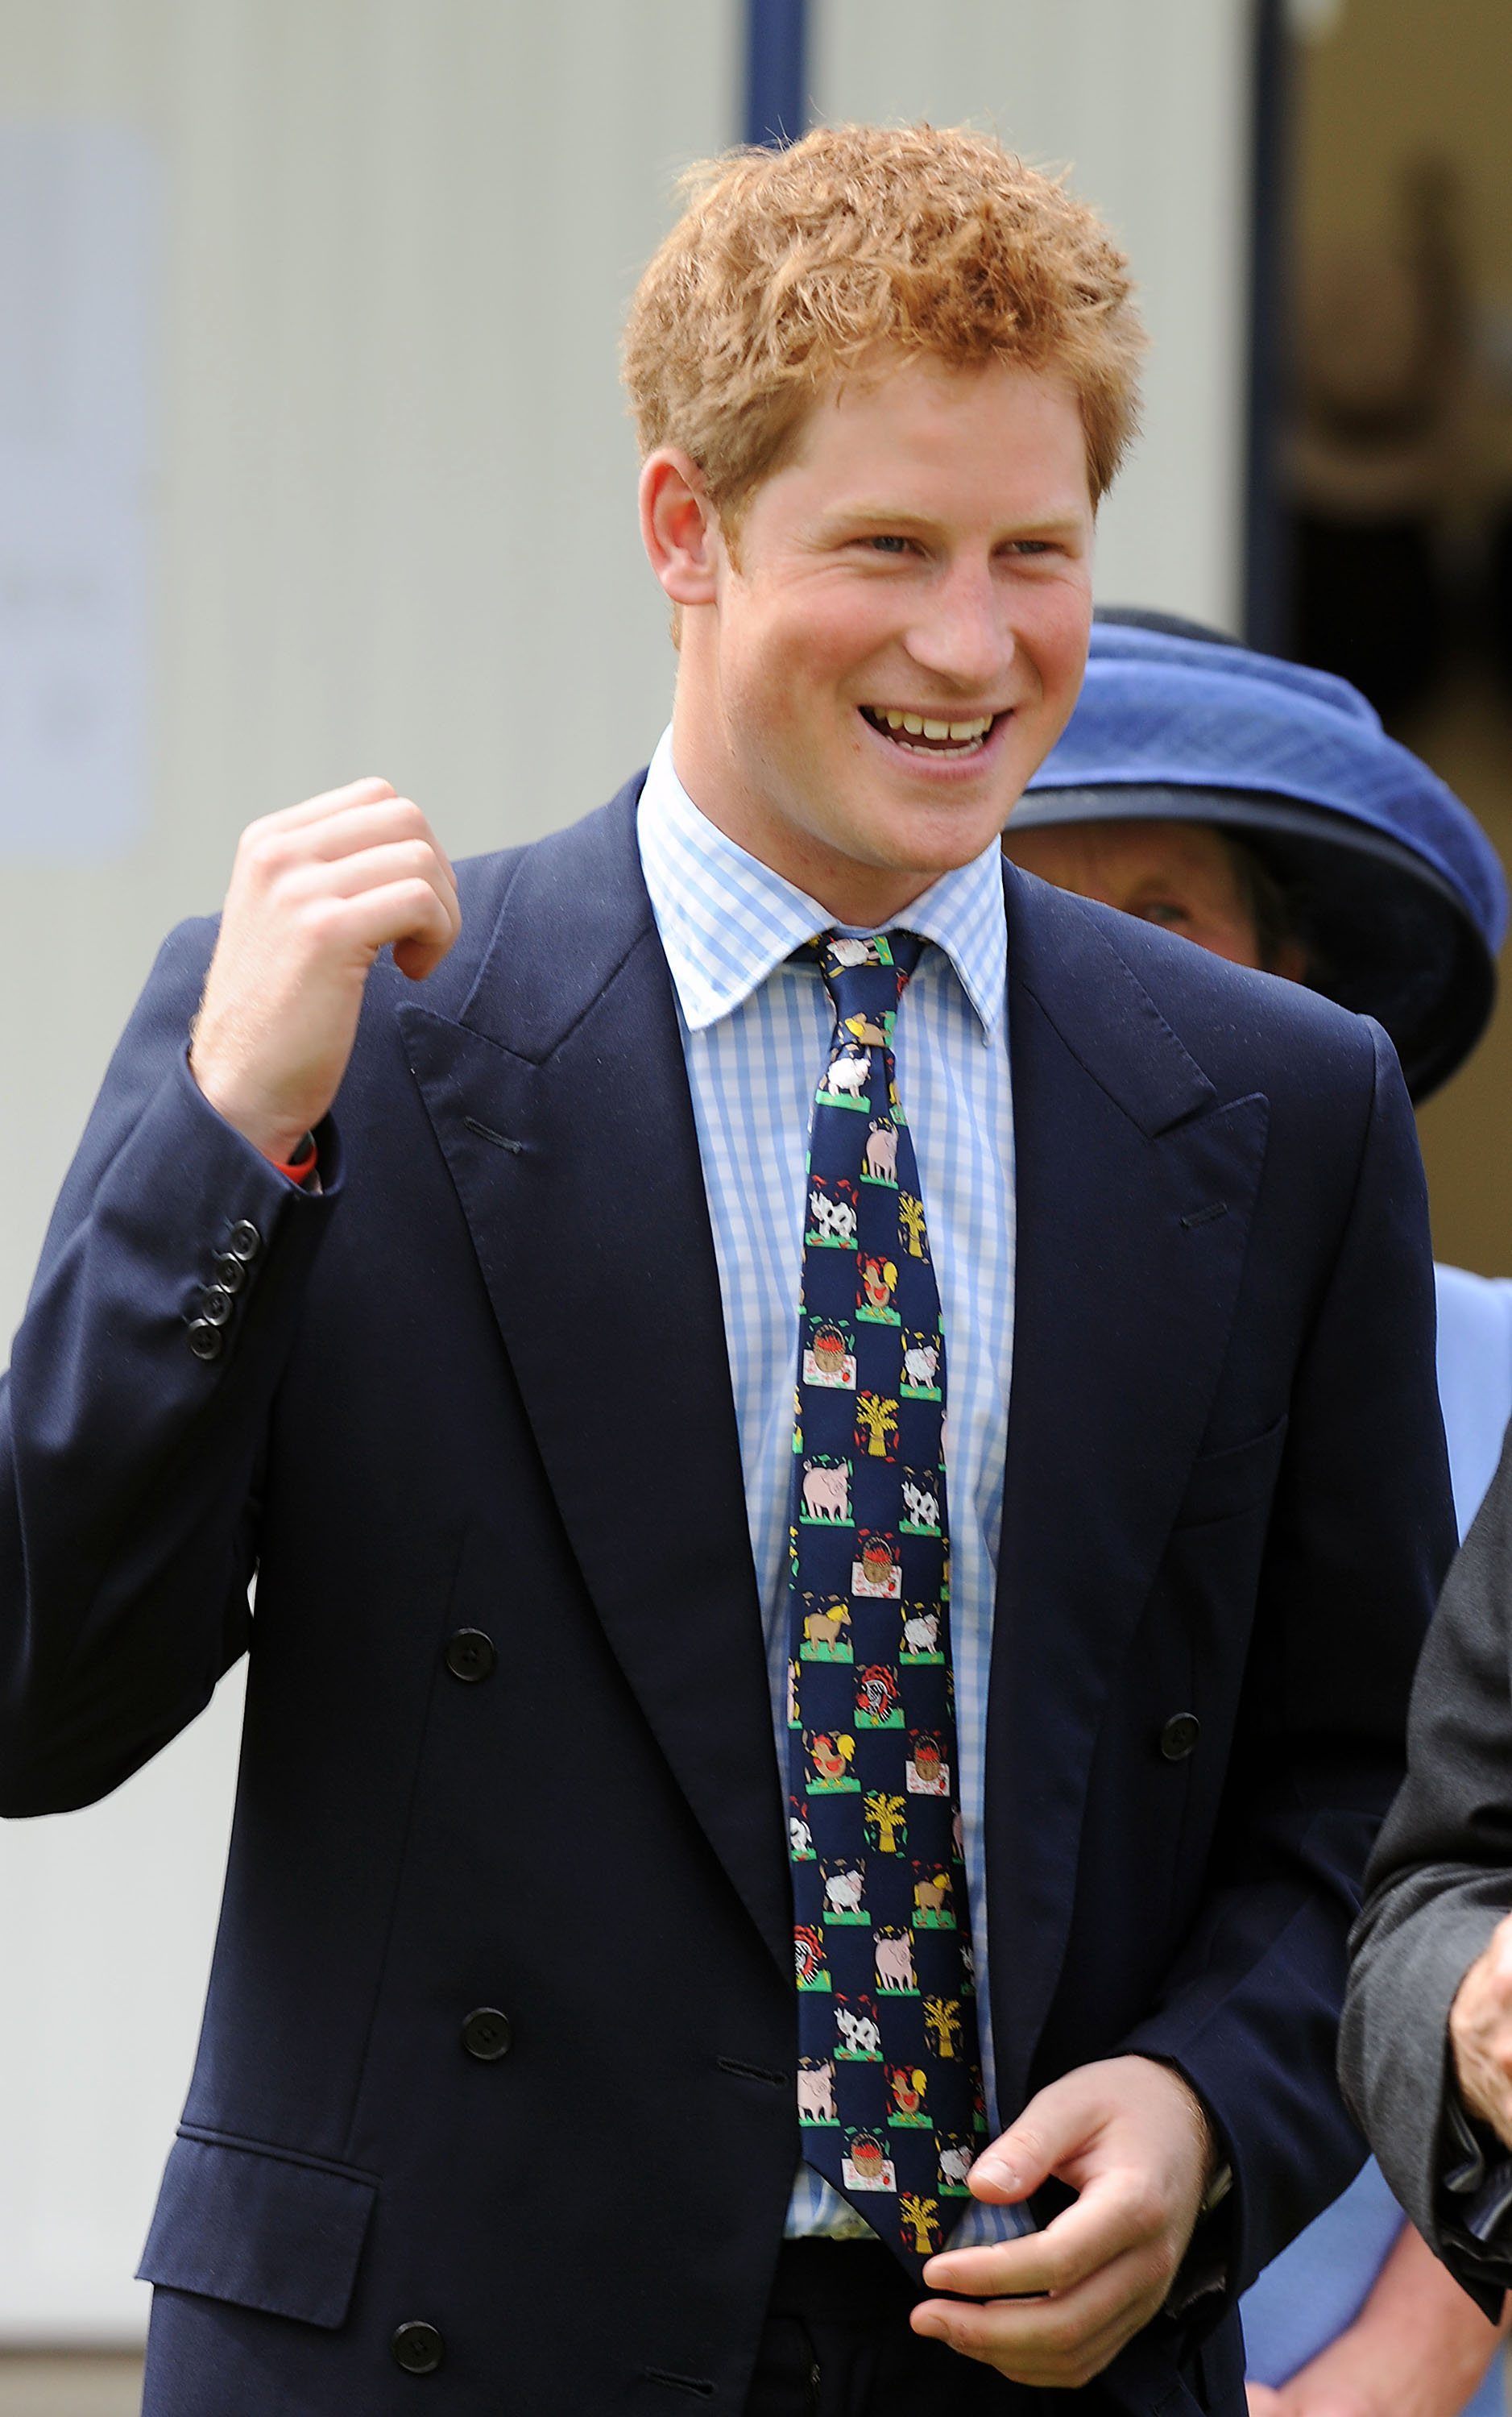 Prince Harry of Wales photo 52 of 450 pics, wallpaper - photo #547278 - ThePlace2